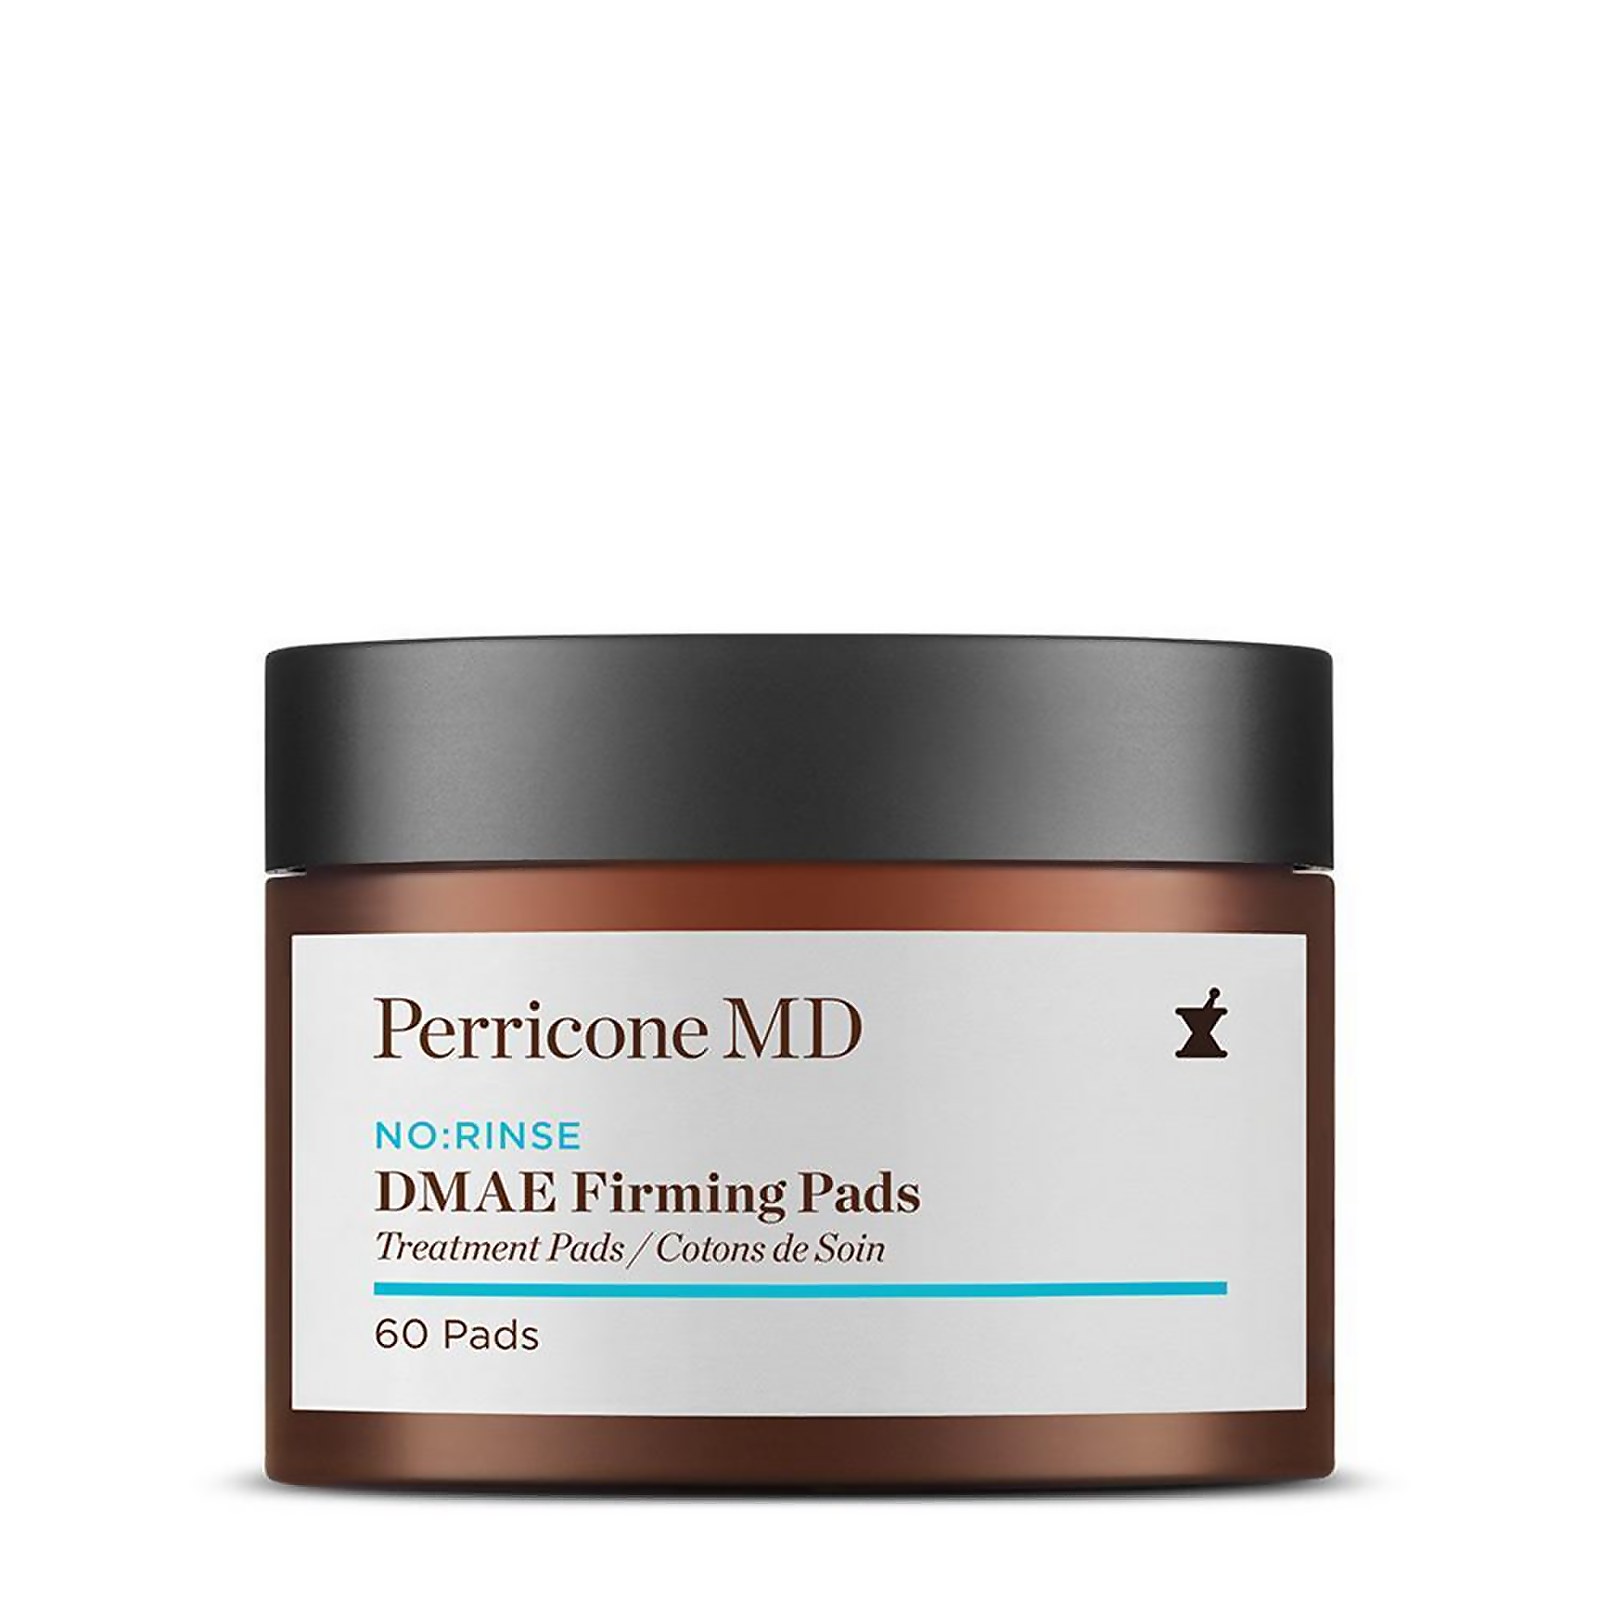 Perricone Md Dmae Firming Pads